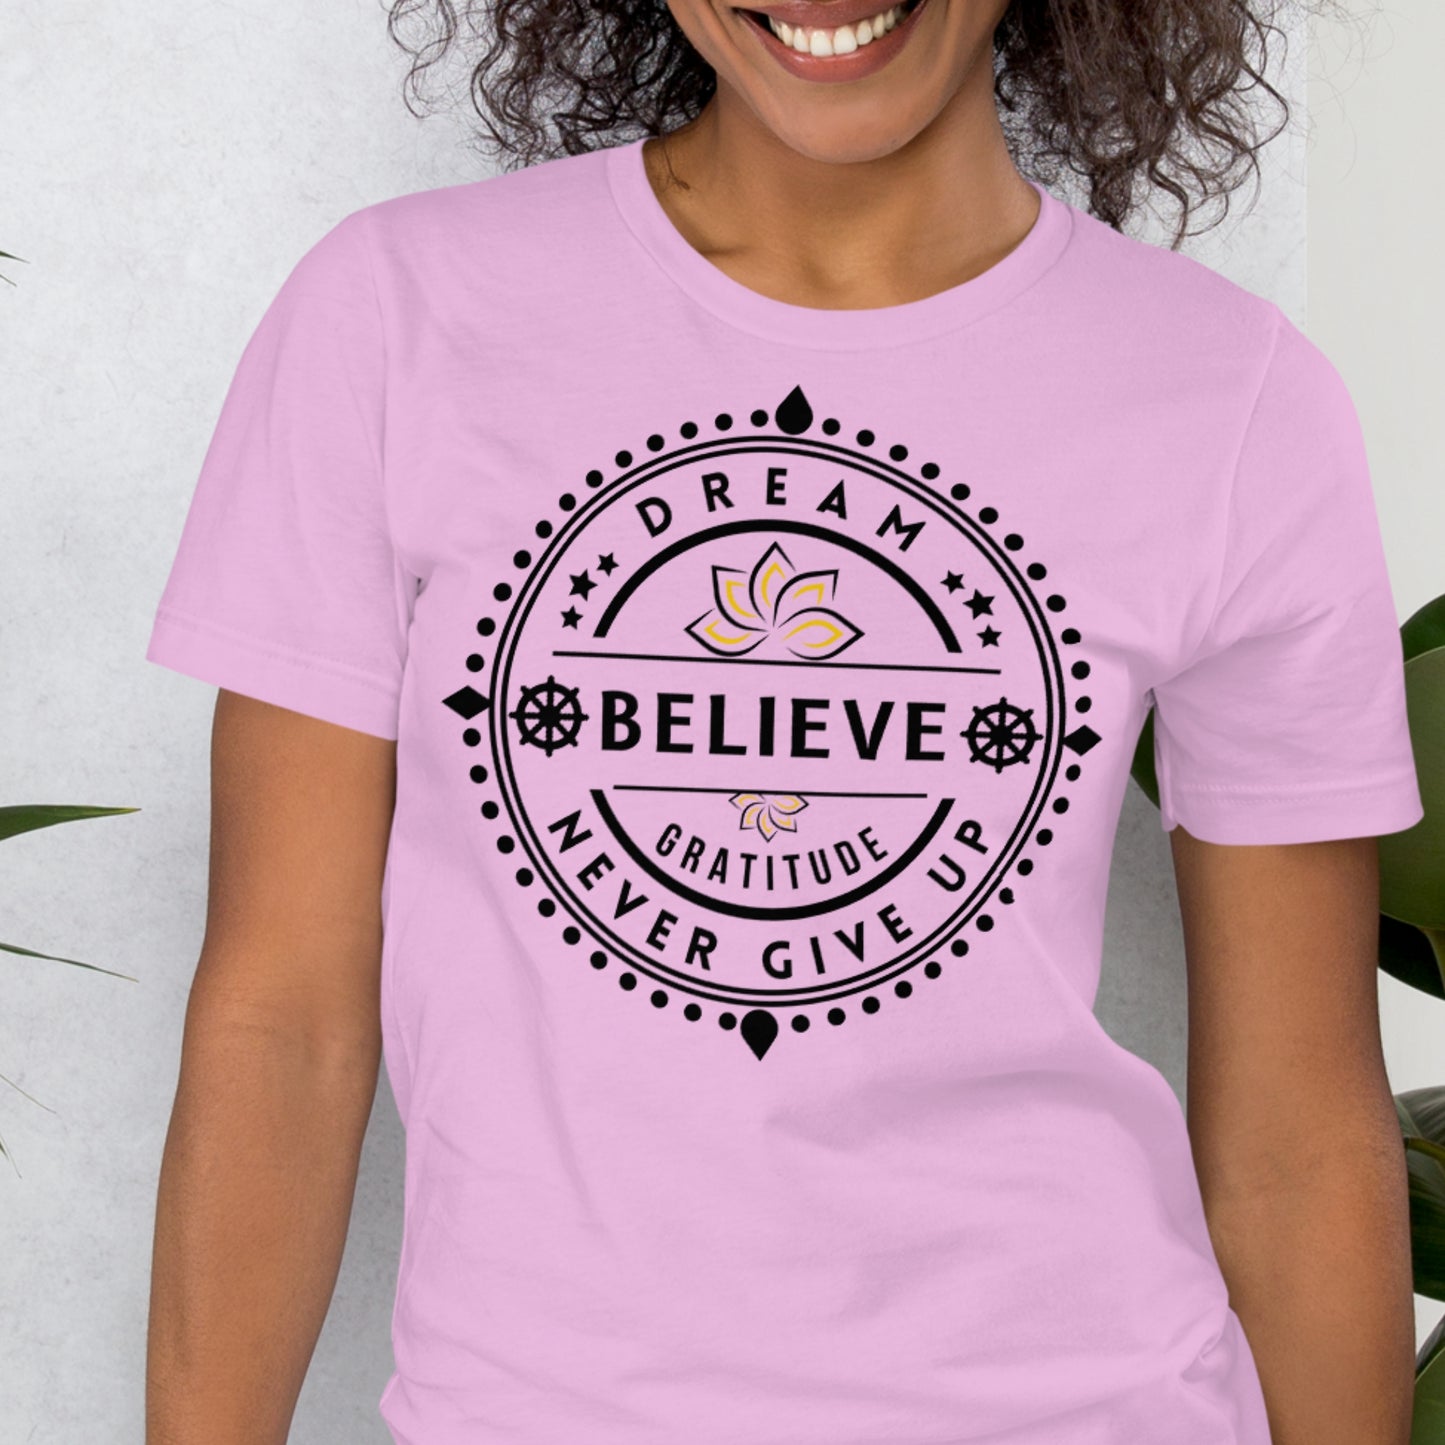 Mindful Living with Attitude T-shirt